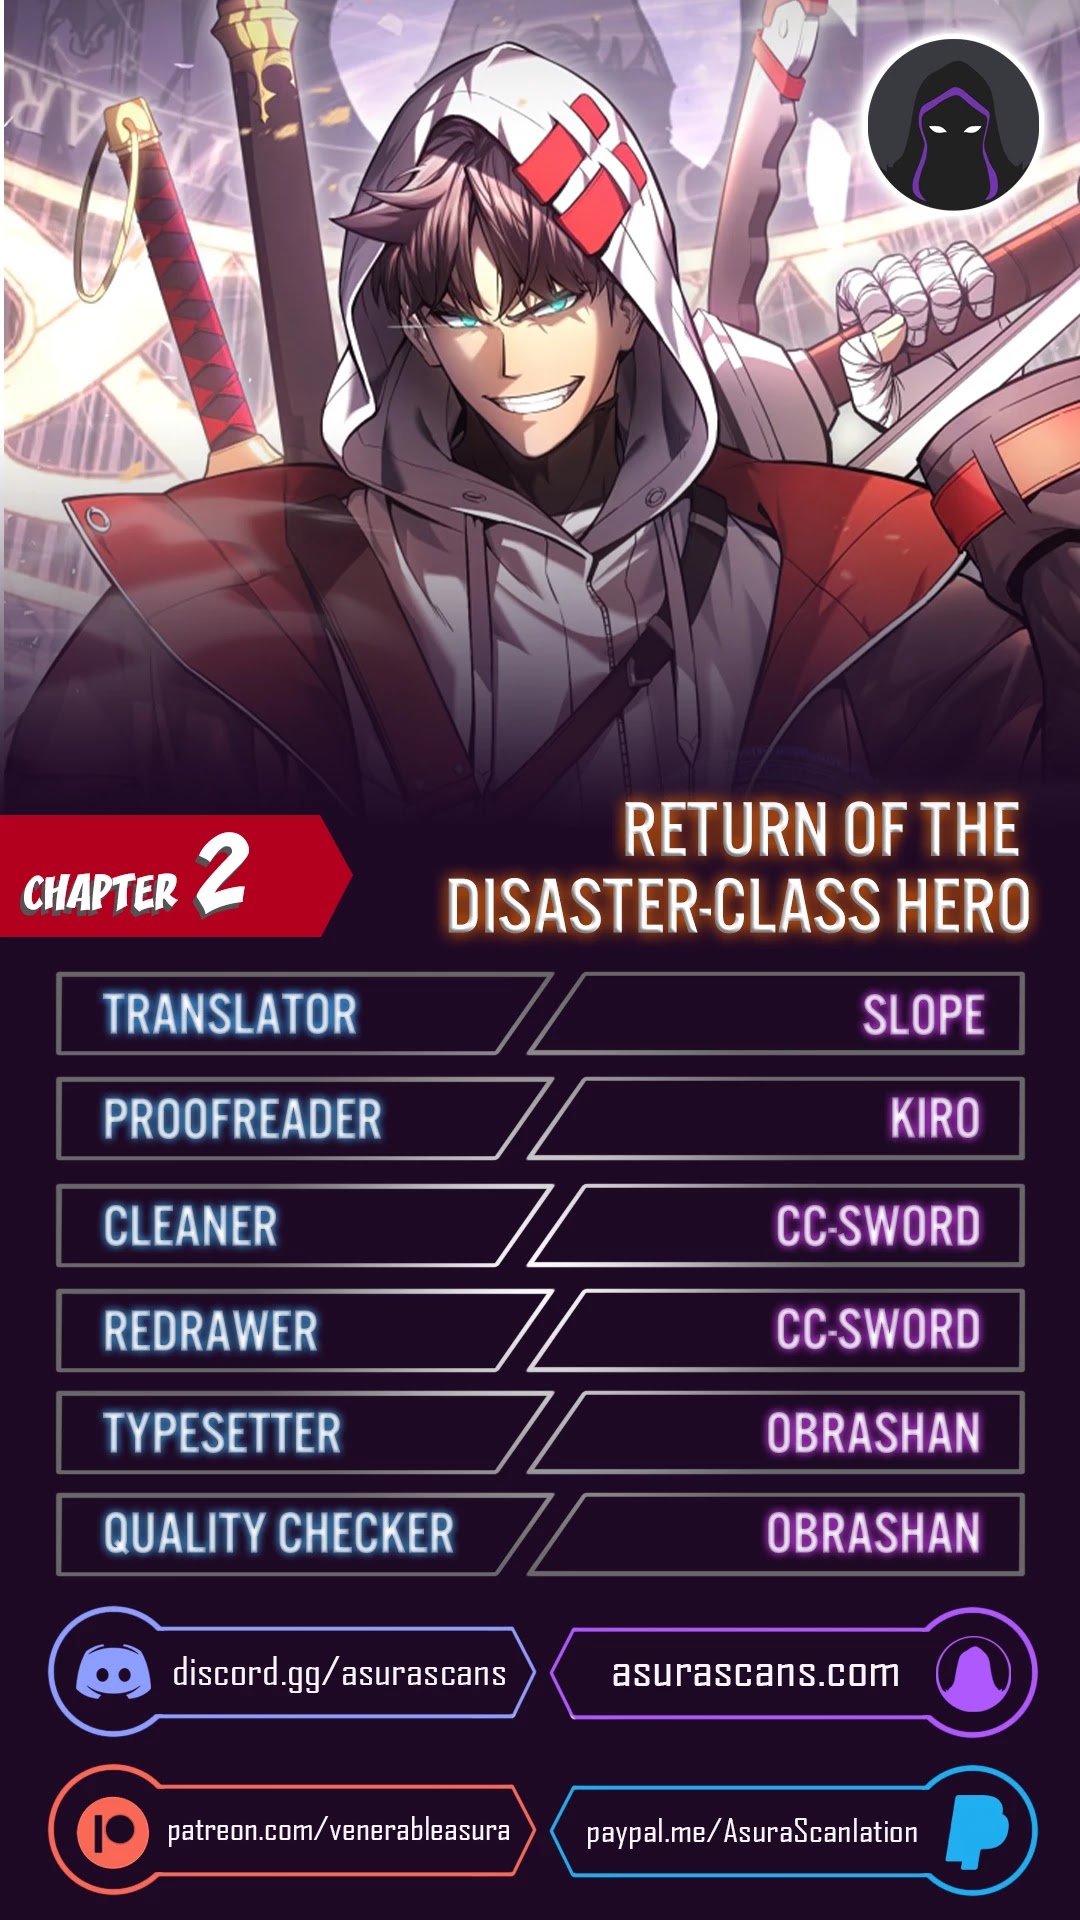 The Return Of The Disaster-Class Hero Chapter 2